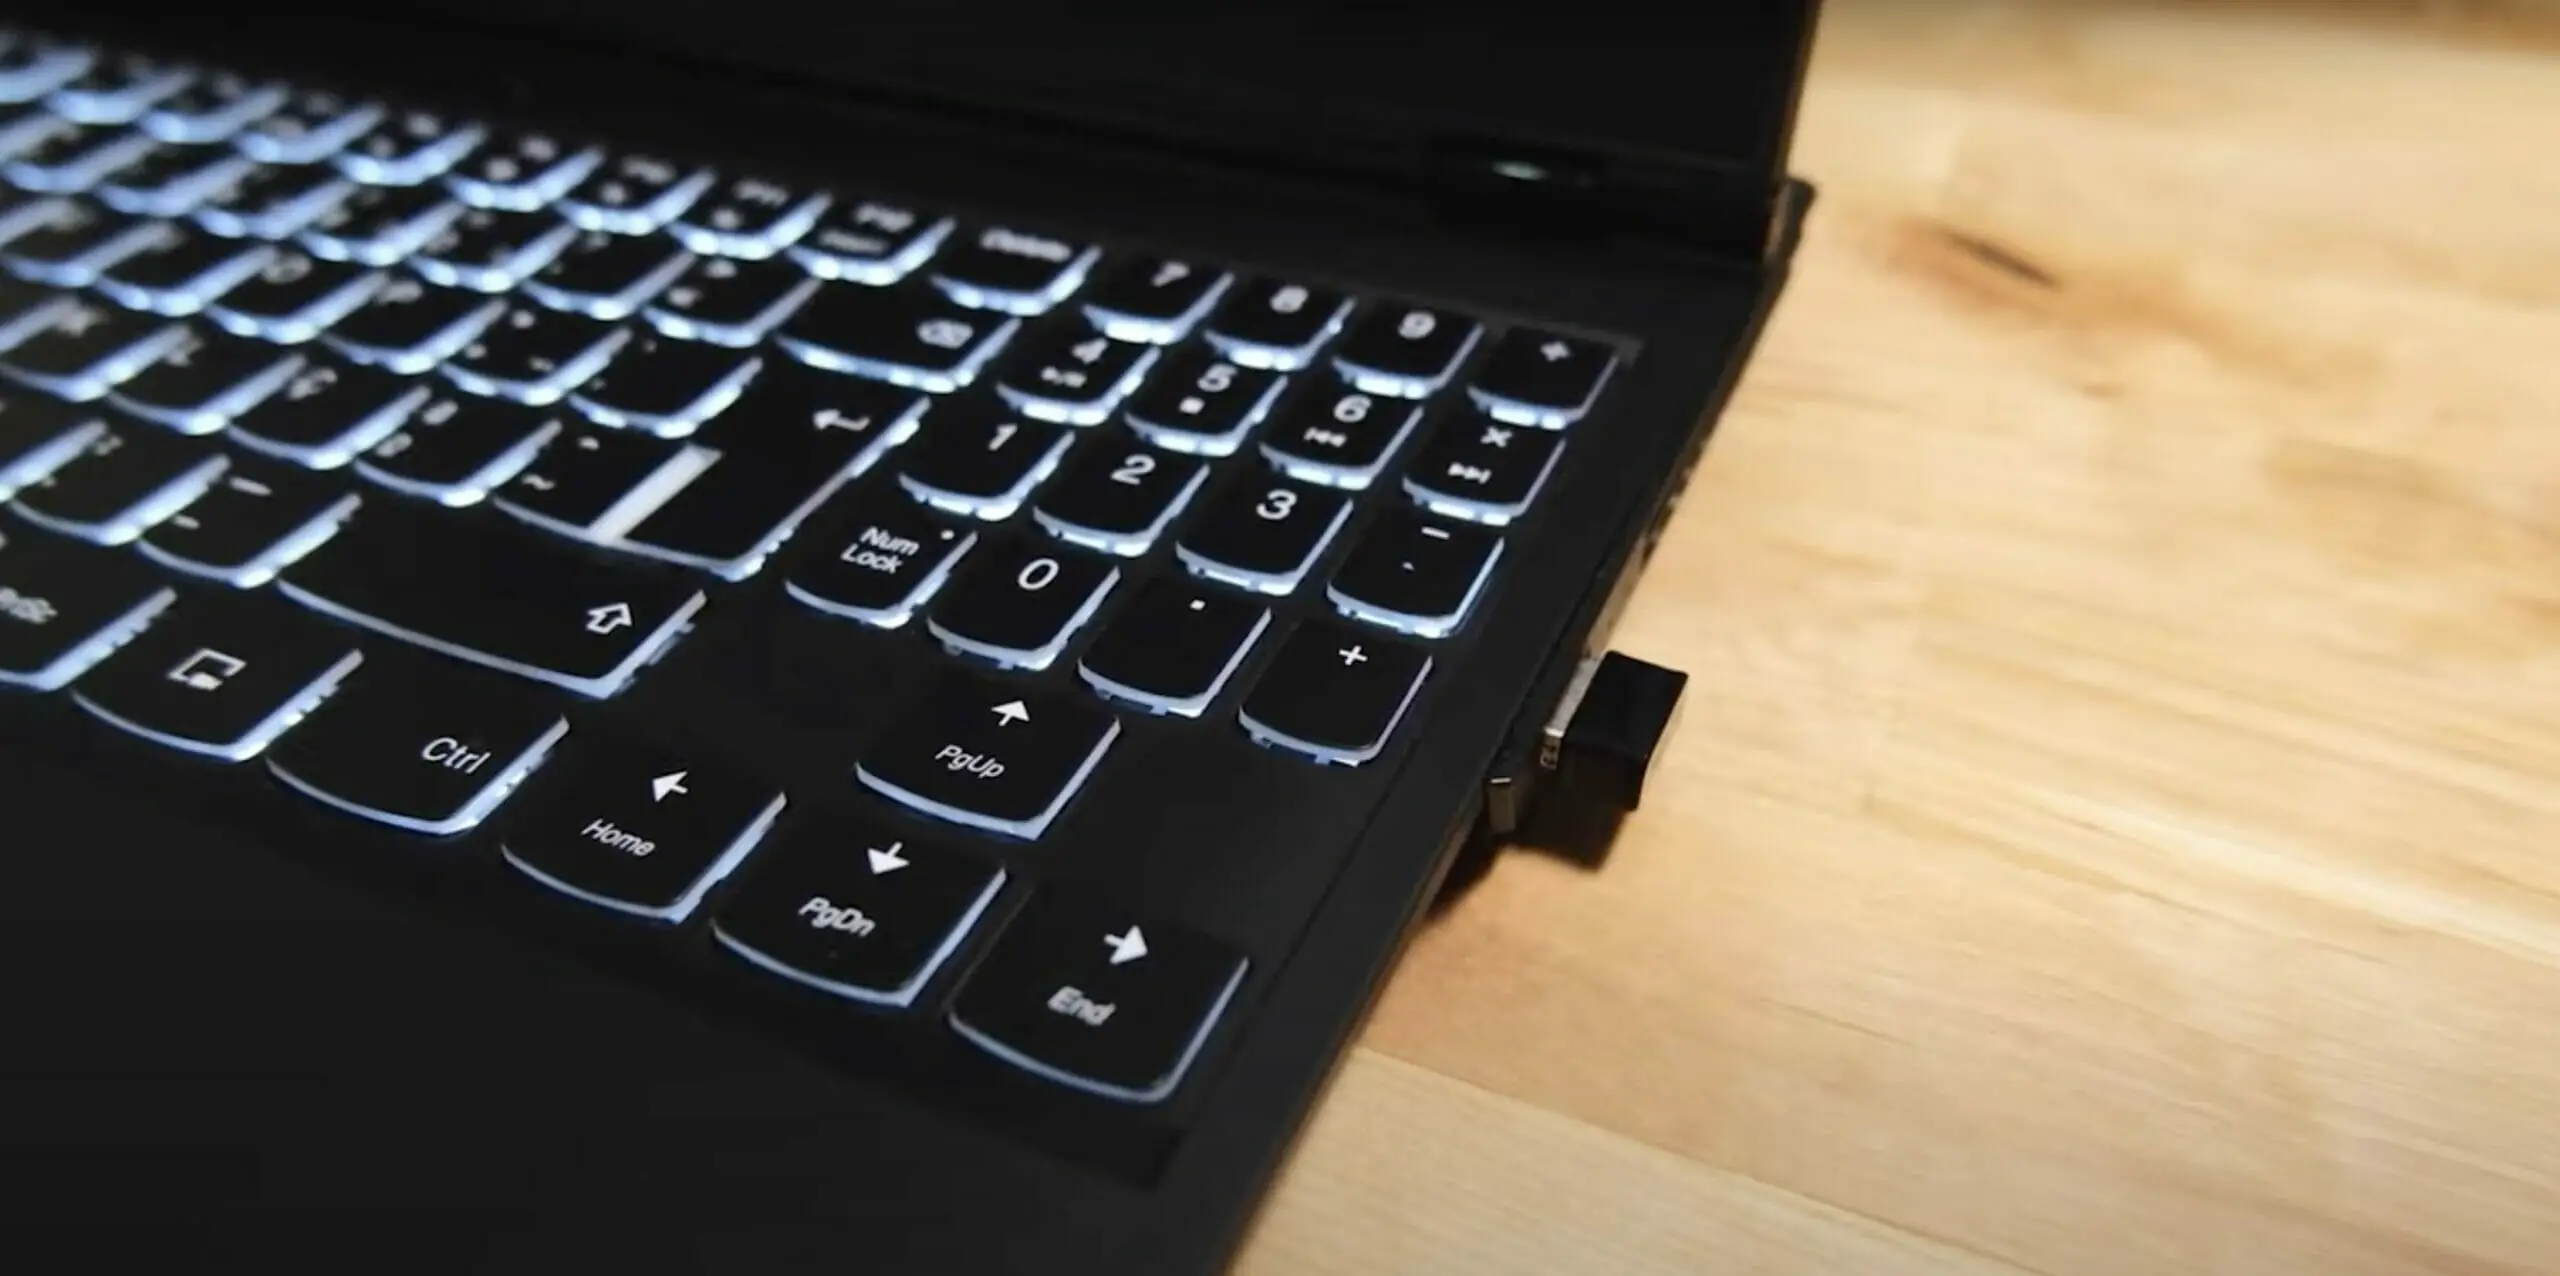 a black keyboard with wireless adapter attached